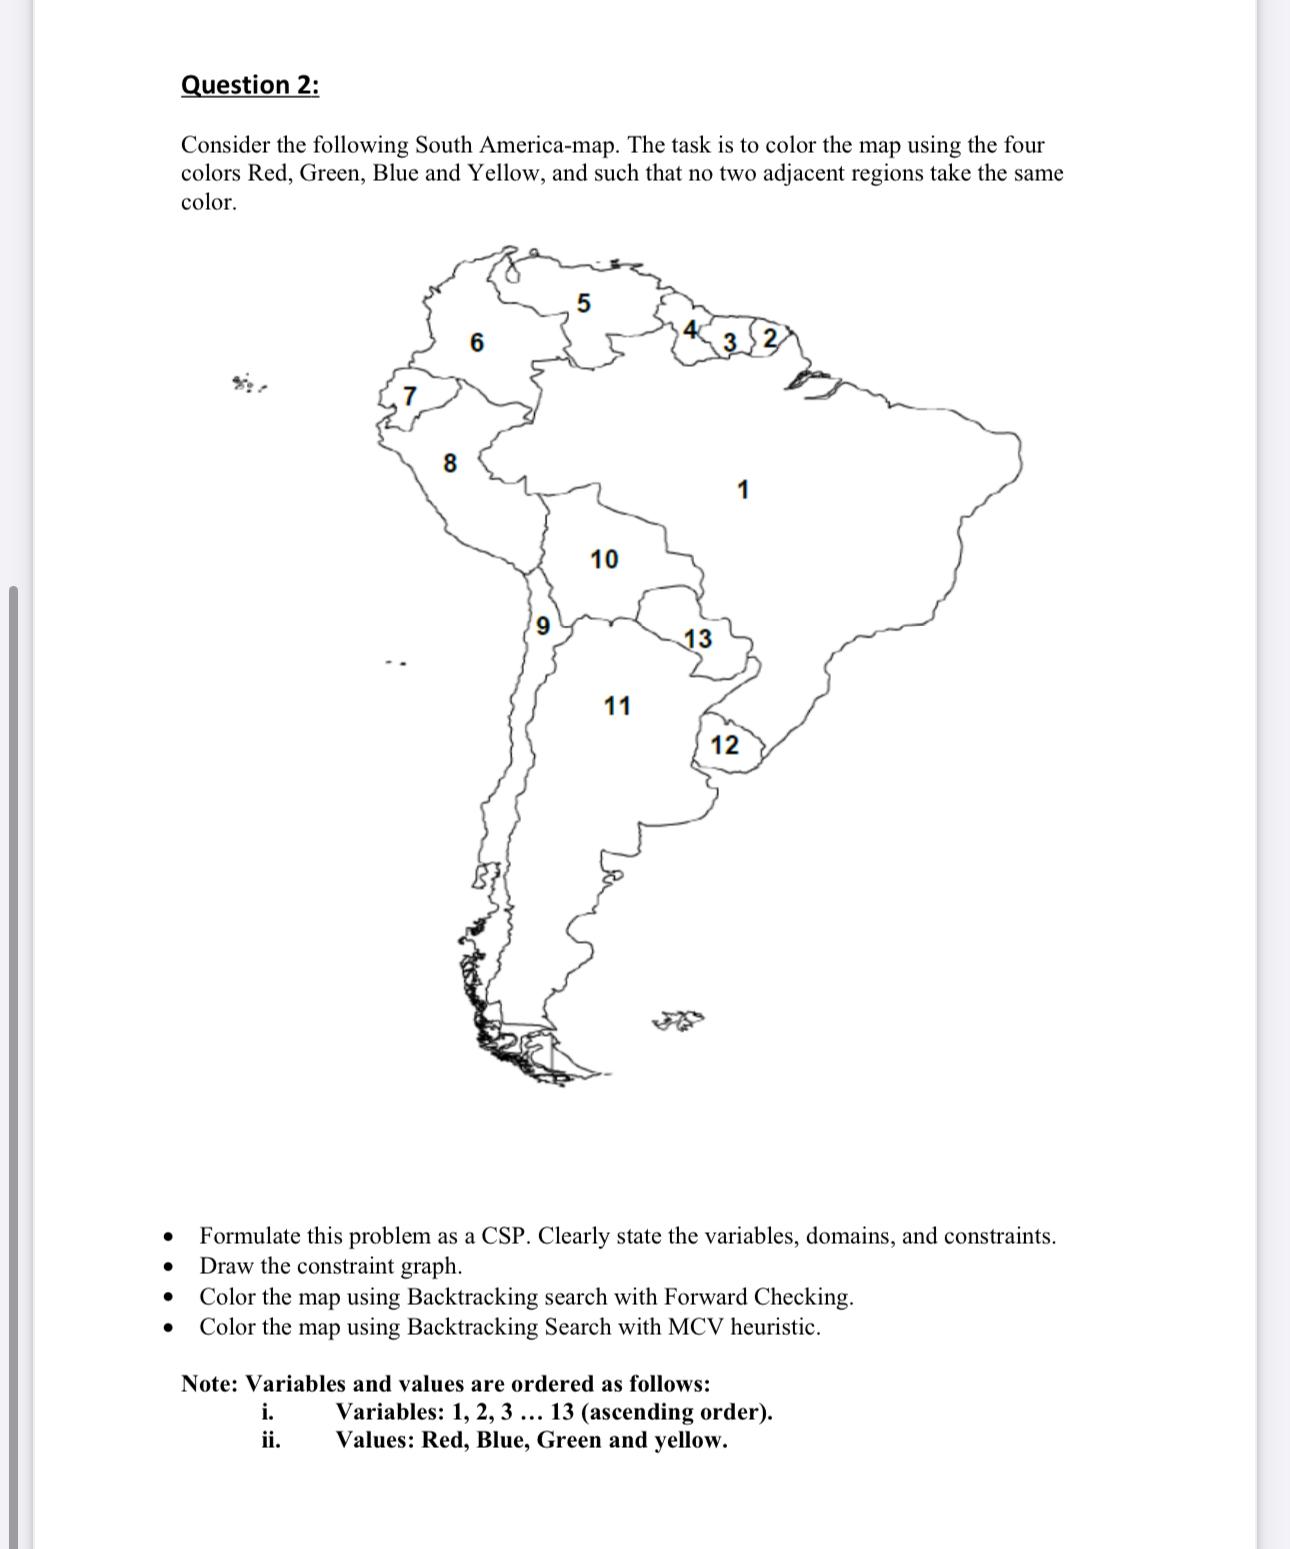 Question 2: Consider the following South America-map. The task is to color the map using the four colors Red,